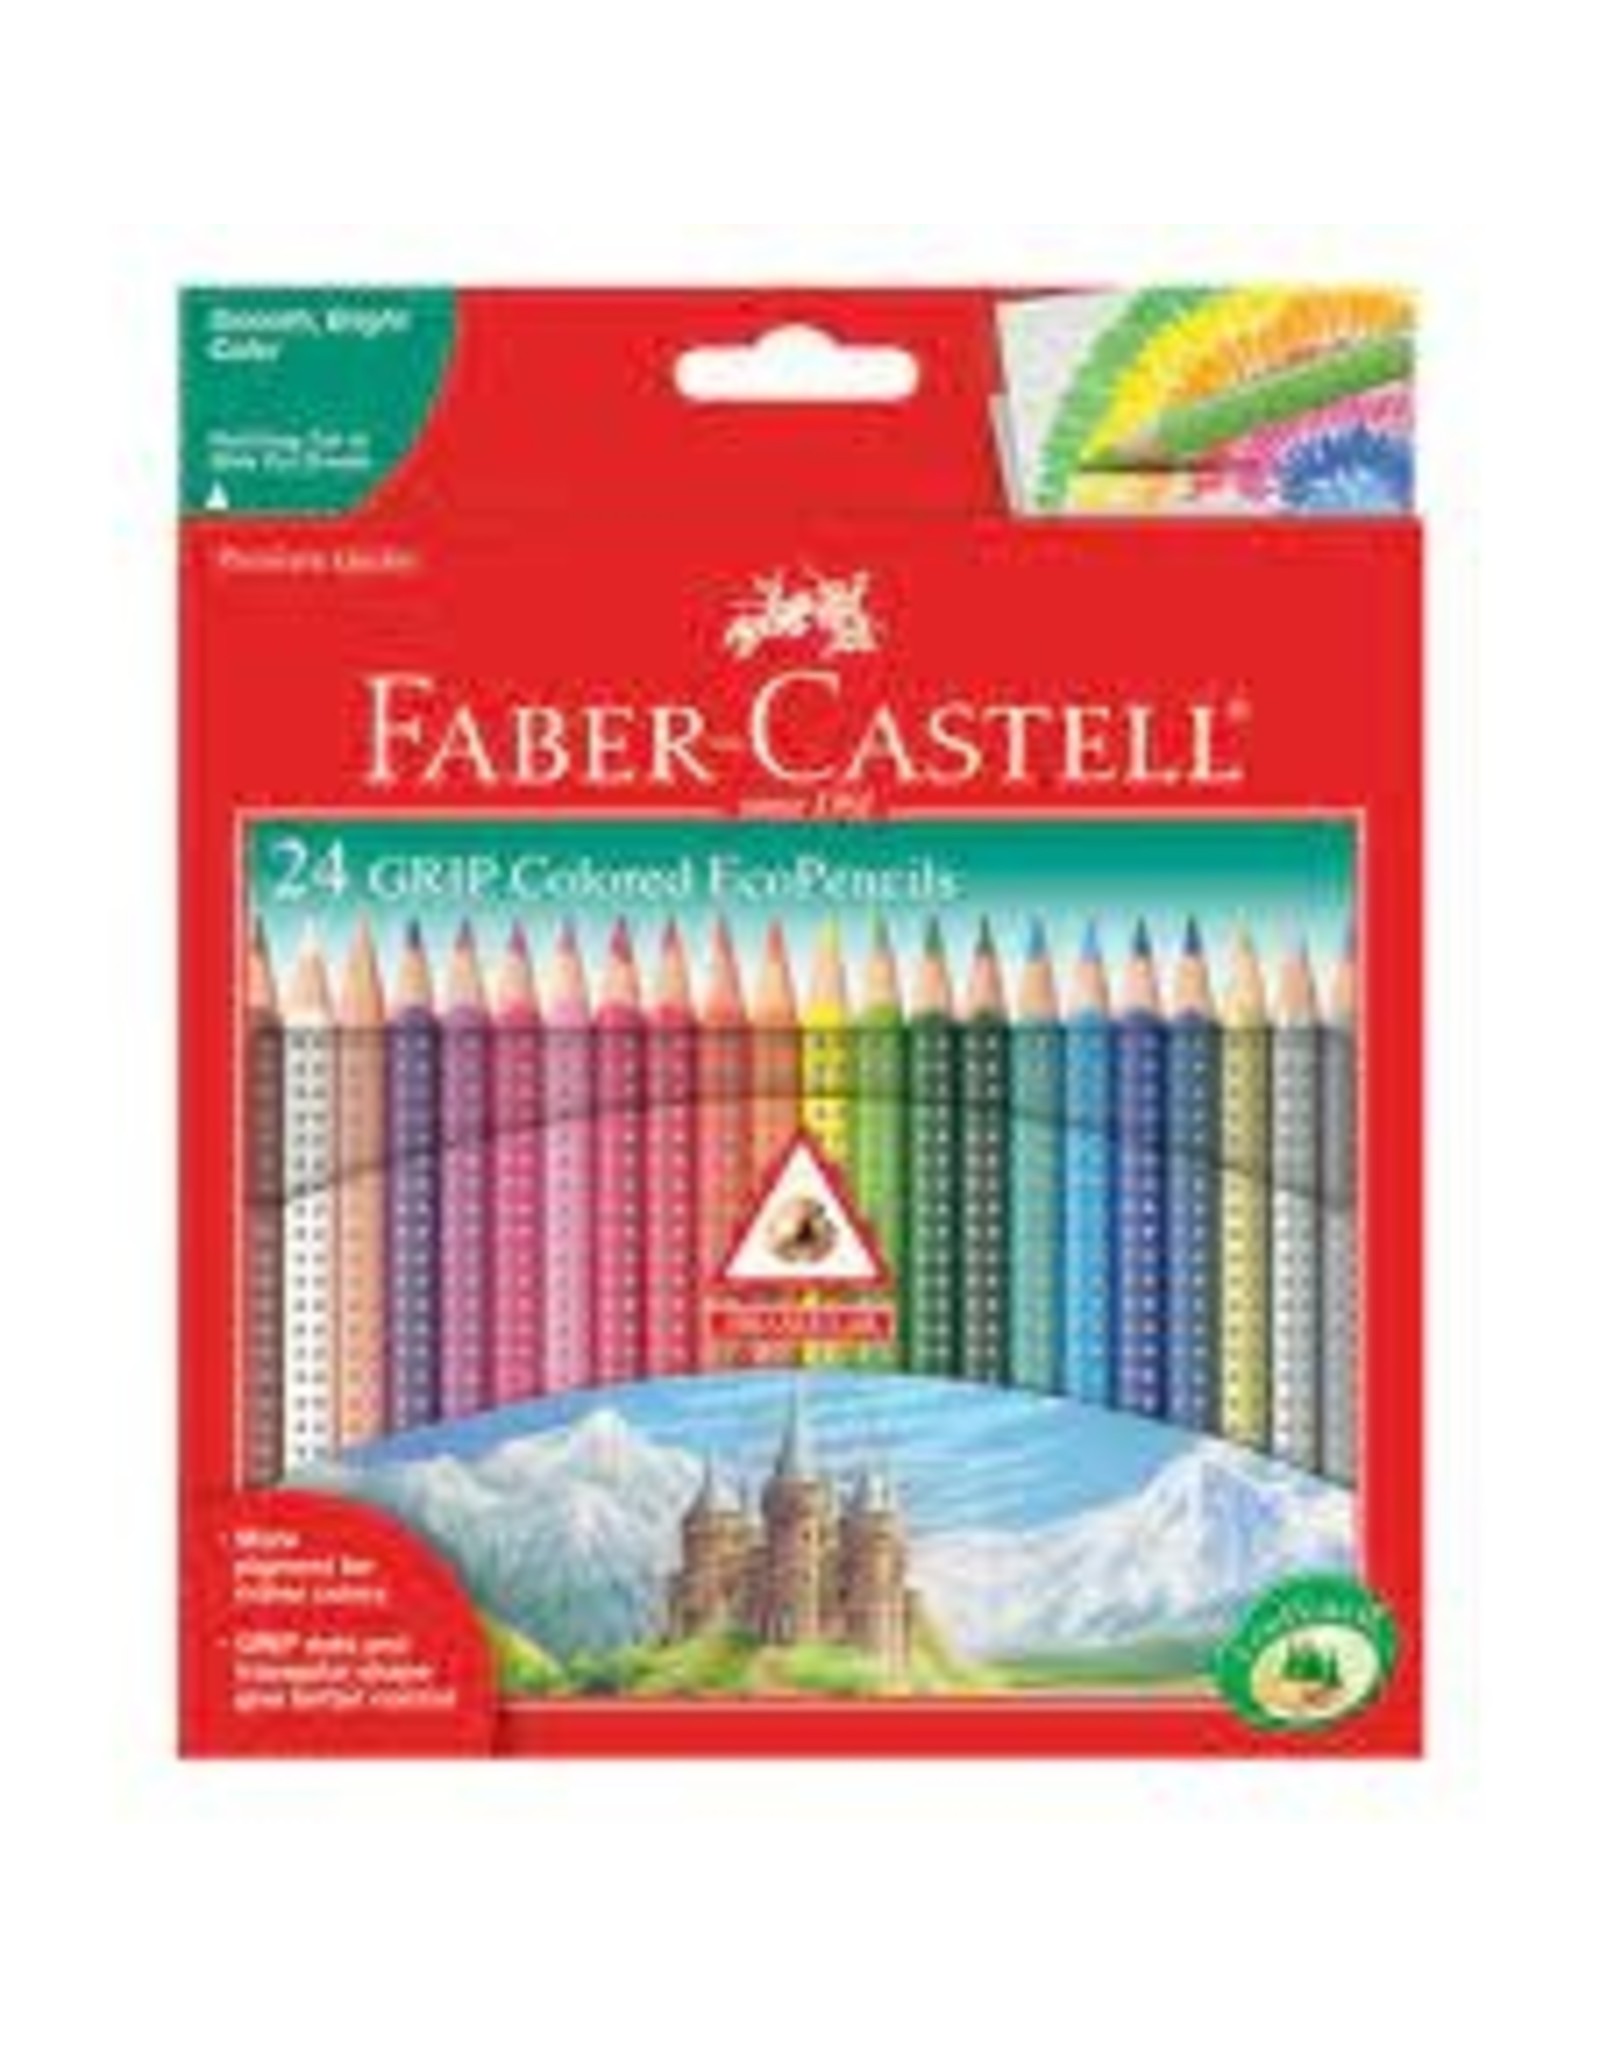 Faber Castell 24ct Grip Colored EcoPencils